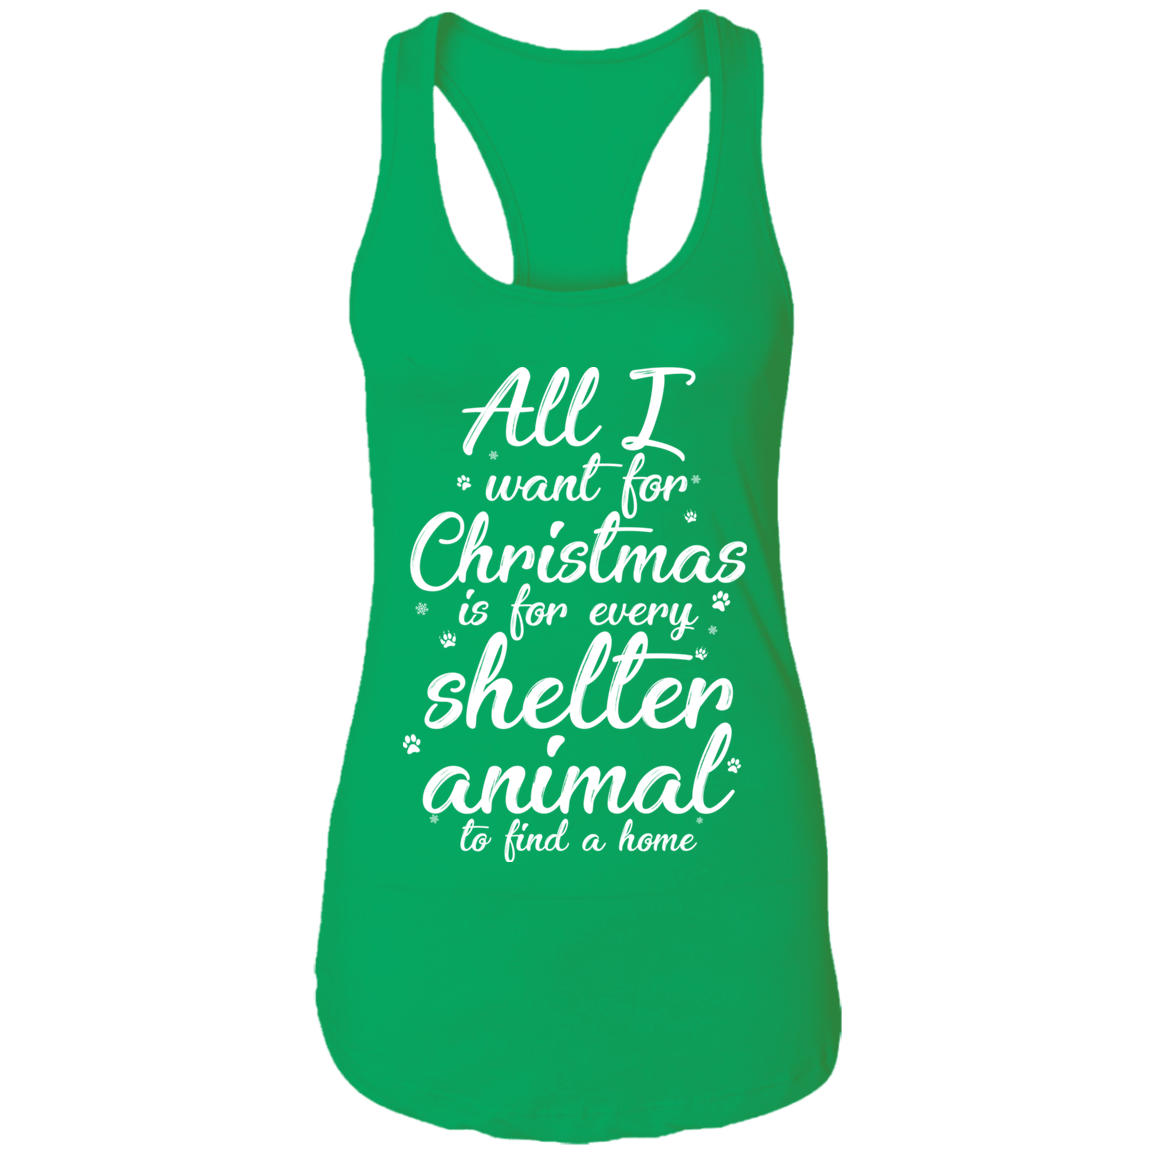 All I Want For Christmas  - Ladies Racer Back Tank.